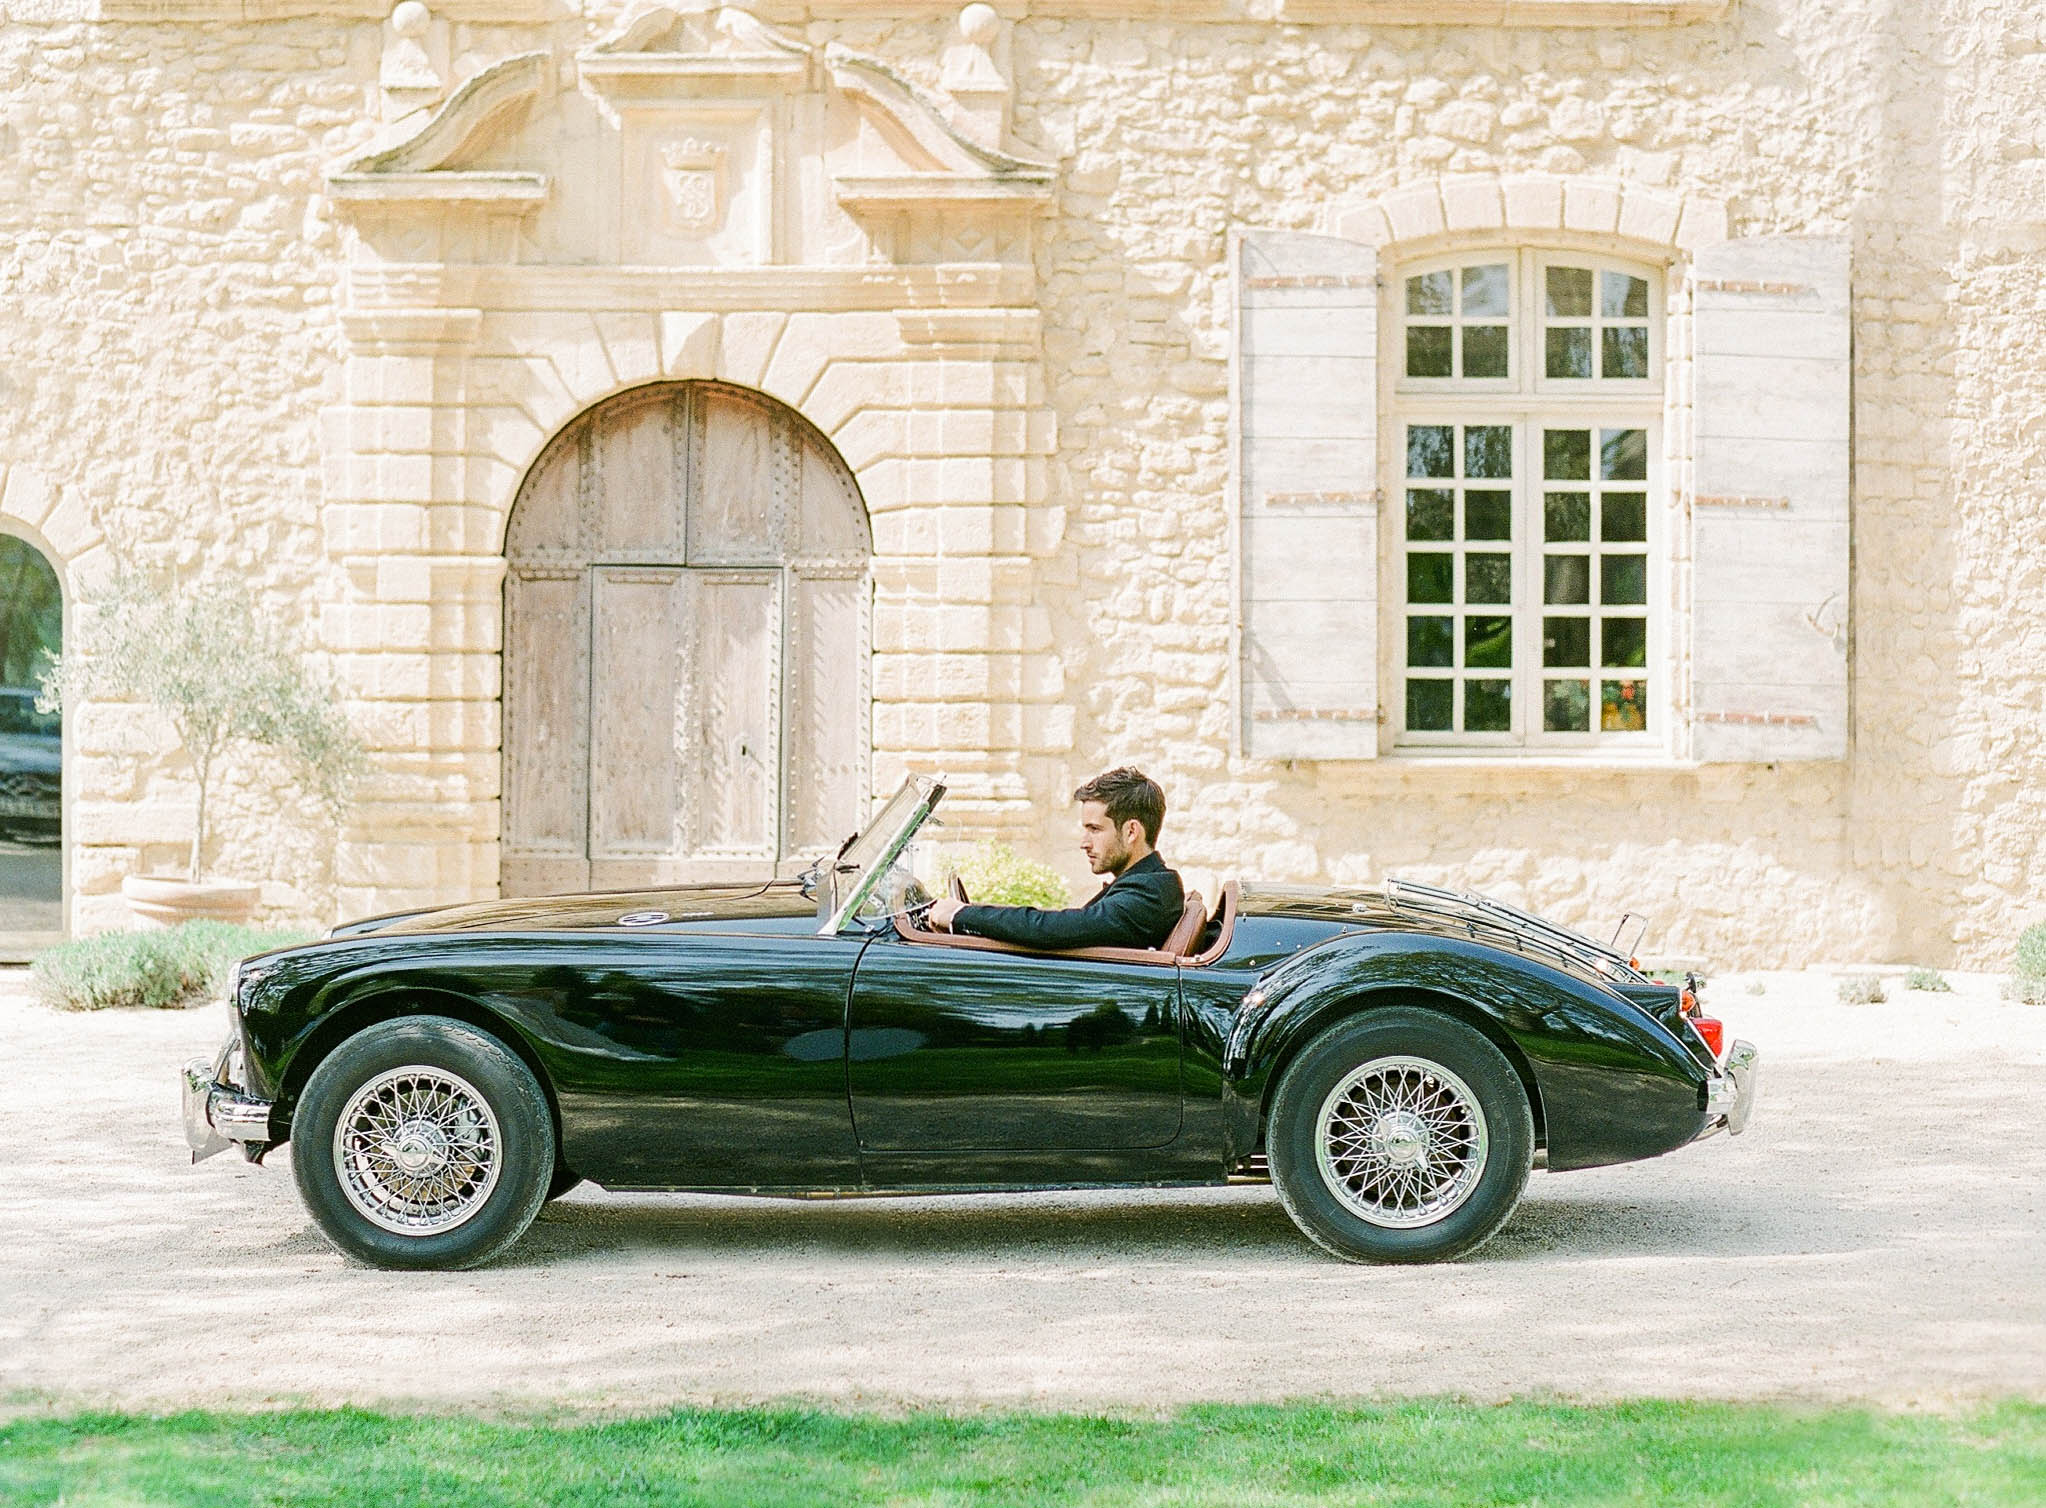 A photo of one of the cars available to rent at Provence Classics, who offer Classic Car Rental in the south of France.